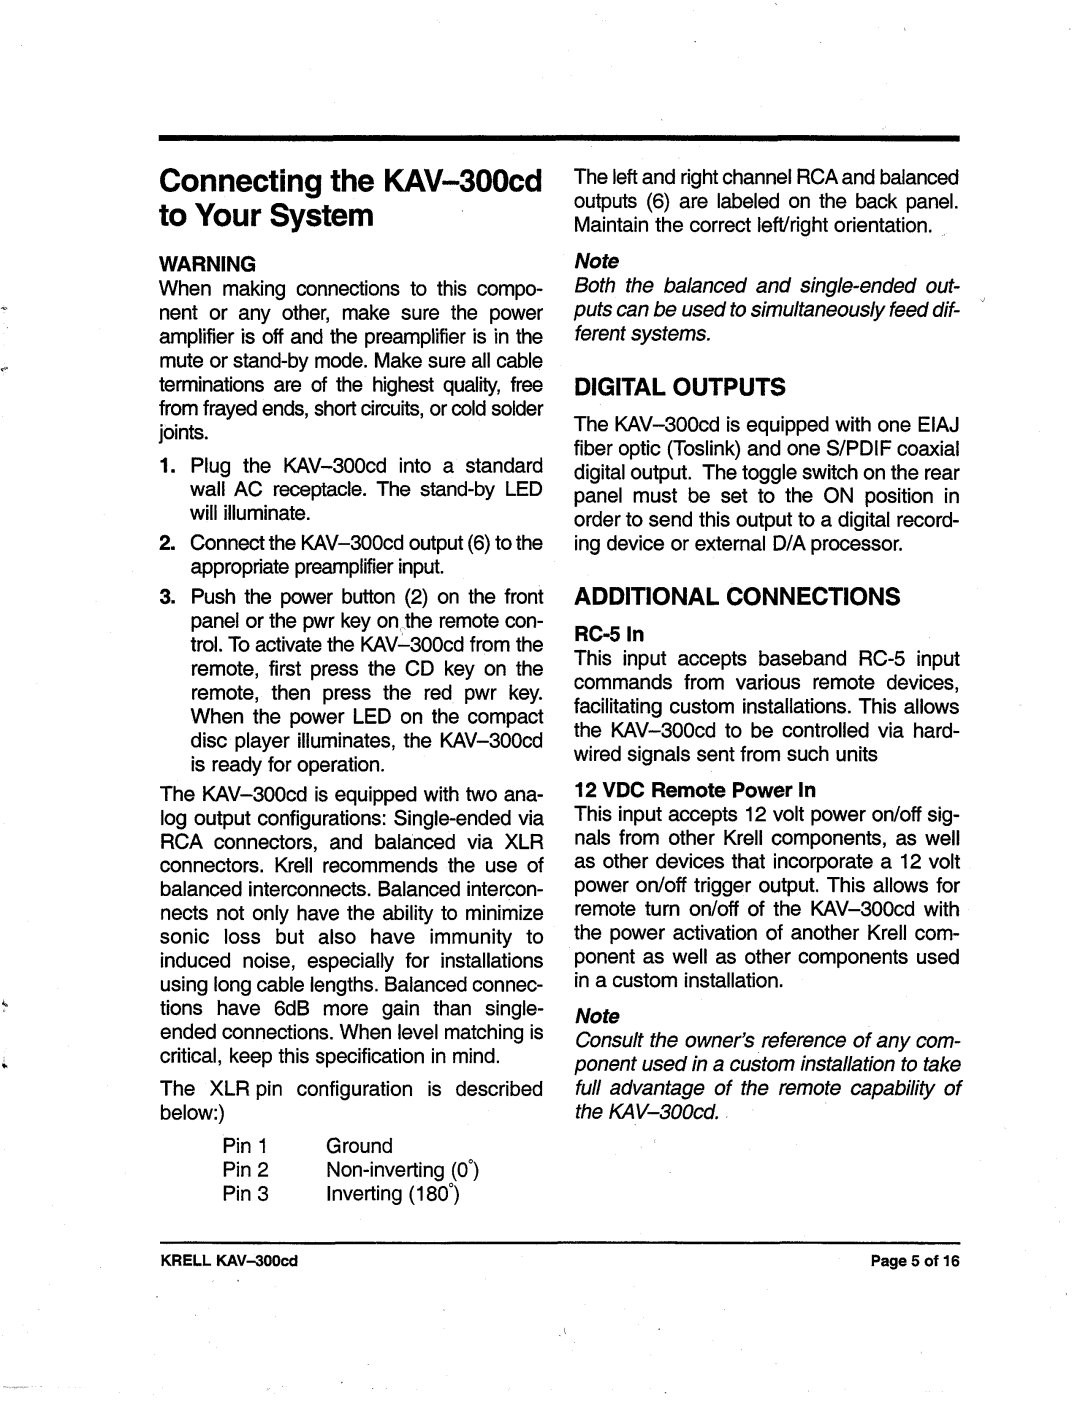 Krell Industries manual Connectingthe KAV-300cdto Your System, Digital Outputs, Additionalconnections, RC-5In 